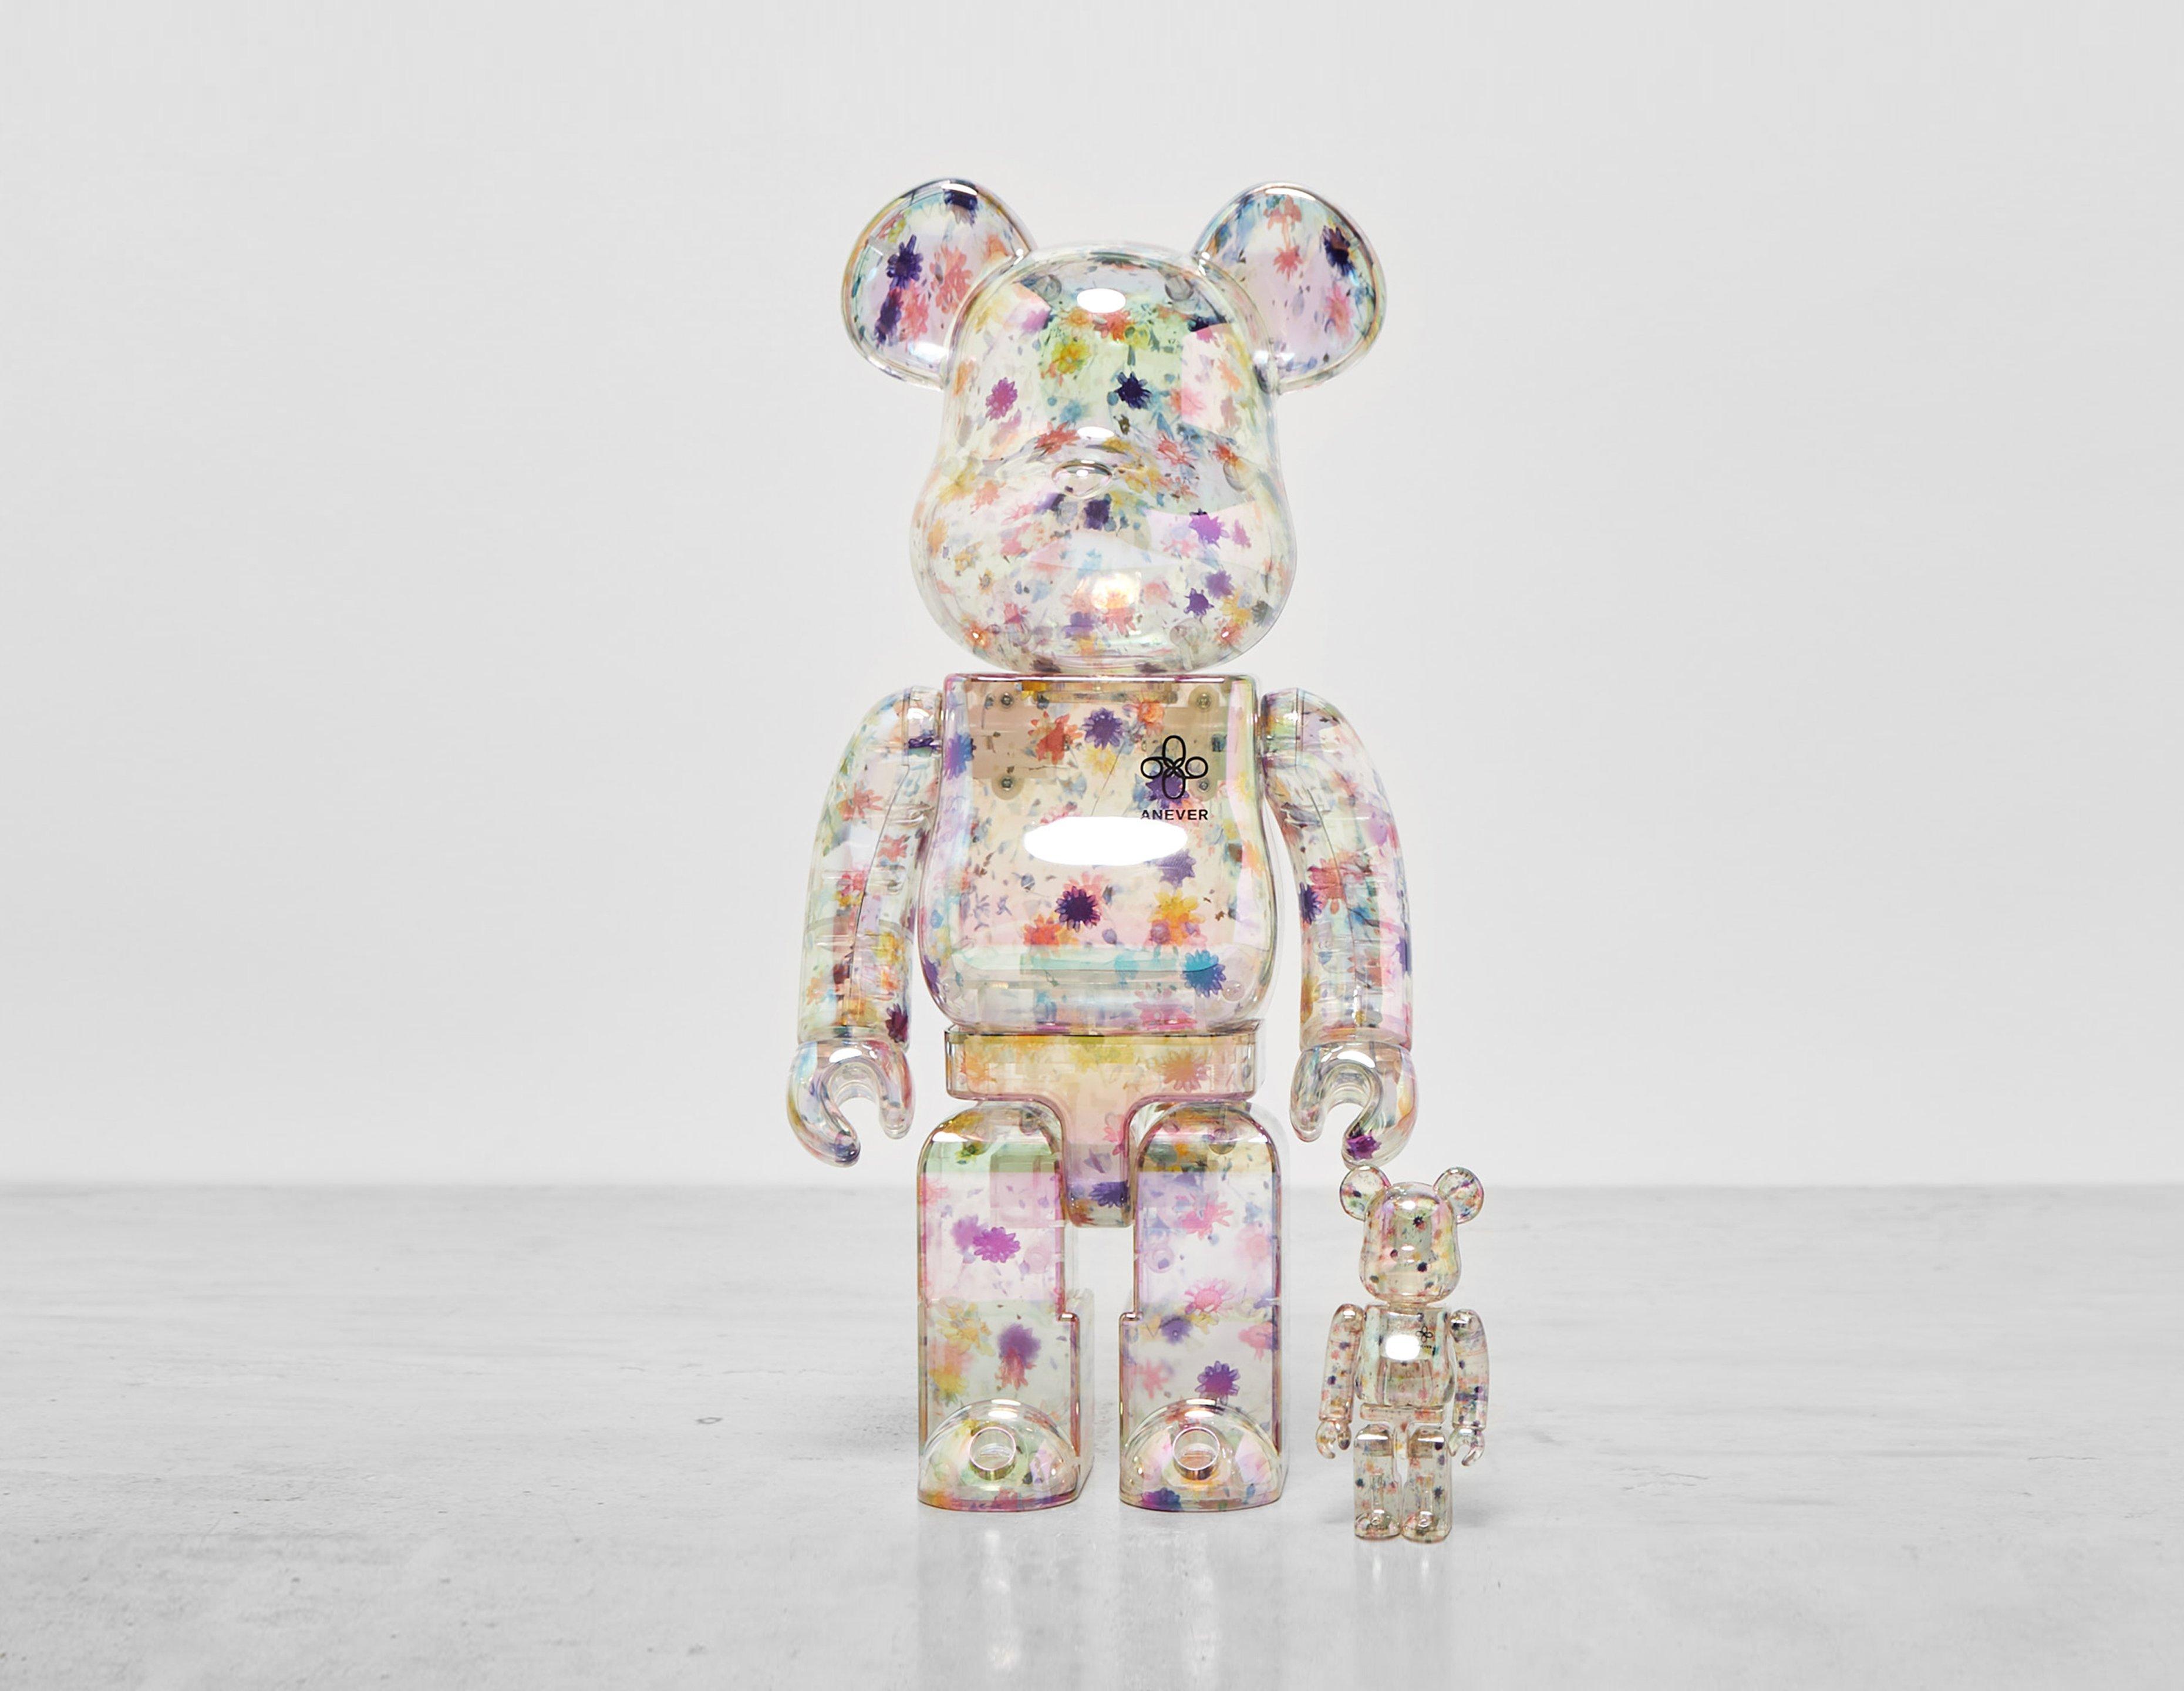 be@rbrick anever 400% 100%その他